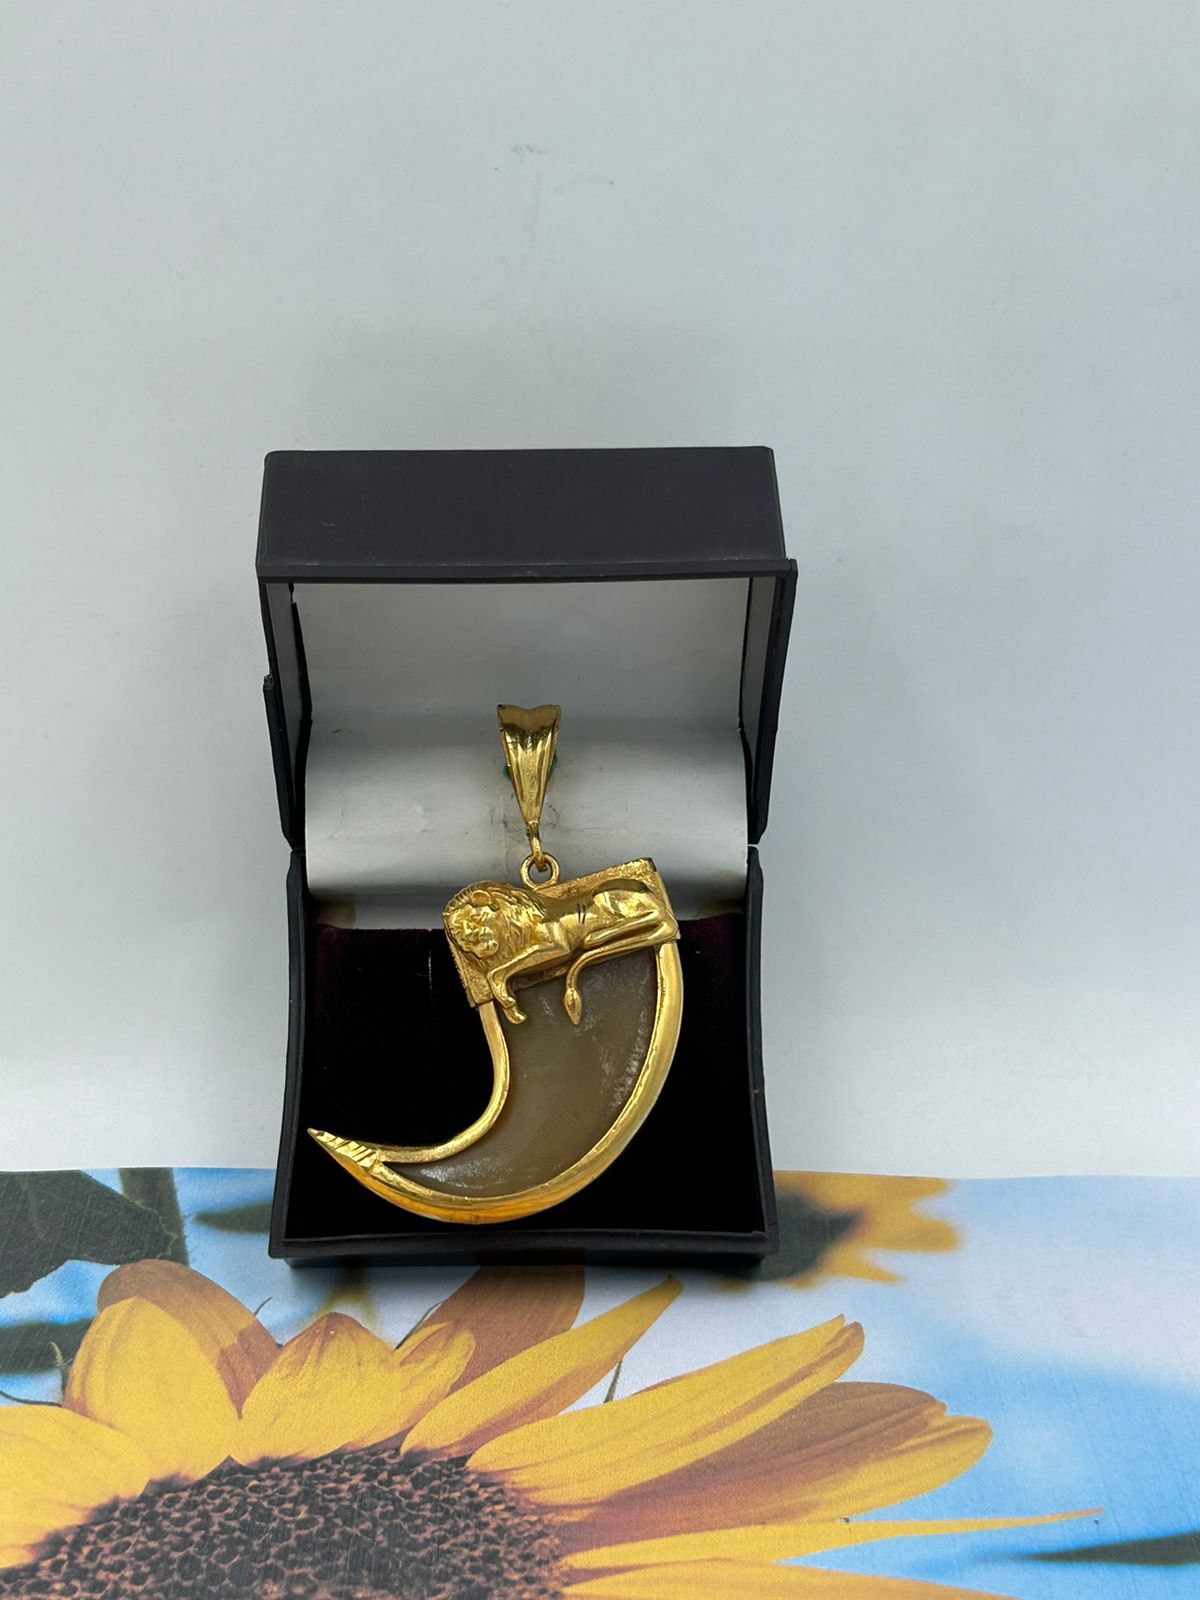 Best Quality Dual Gold Plated Lion Nail with Diamond Pendant By Asp Fa –  𝗔𝘀𝗽 𝗙𝗮𝘀𝗵𝗶𝗼𝗻 𝗝𝗲𝘄𝗲𝗹𝗹𝗲𝗿𝘆